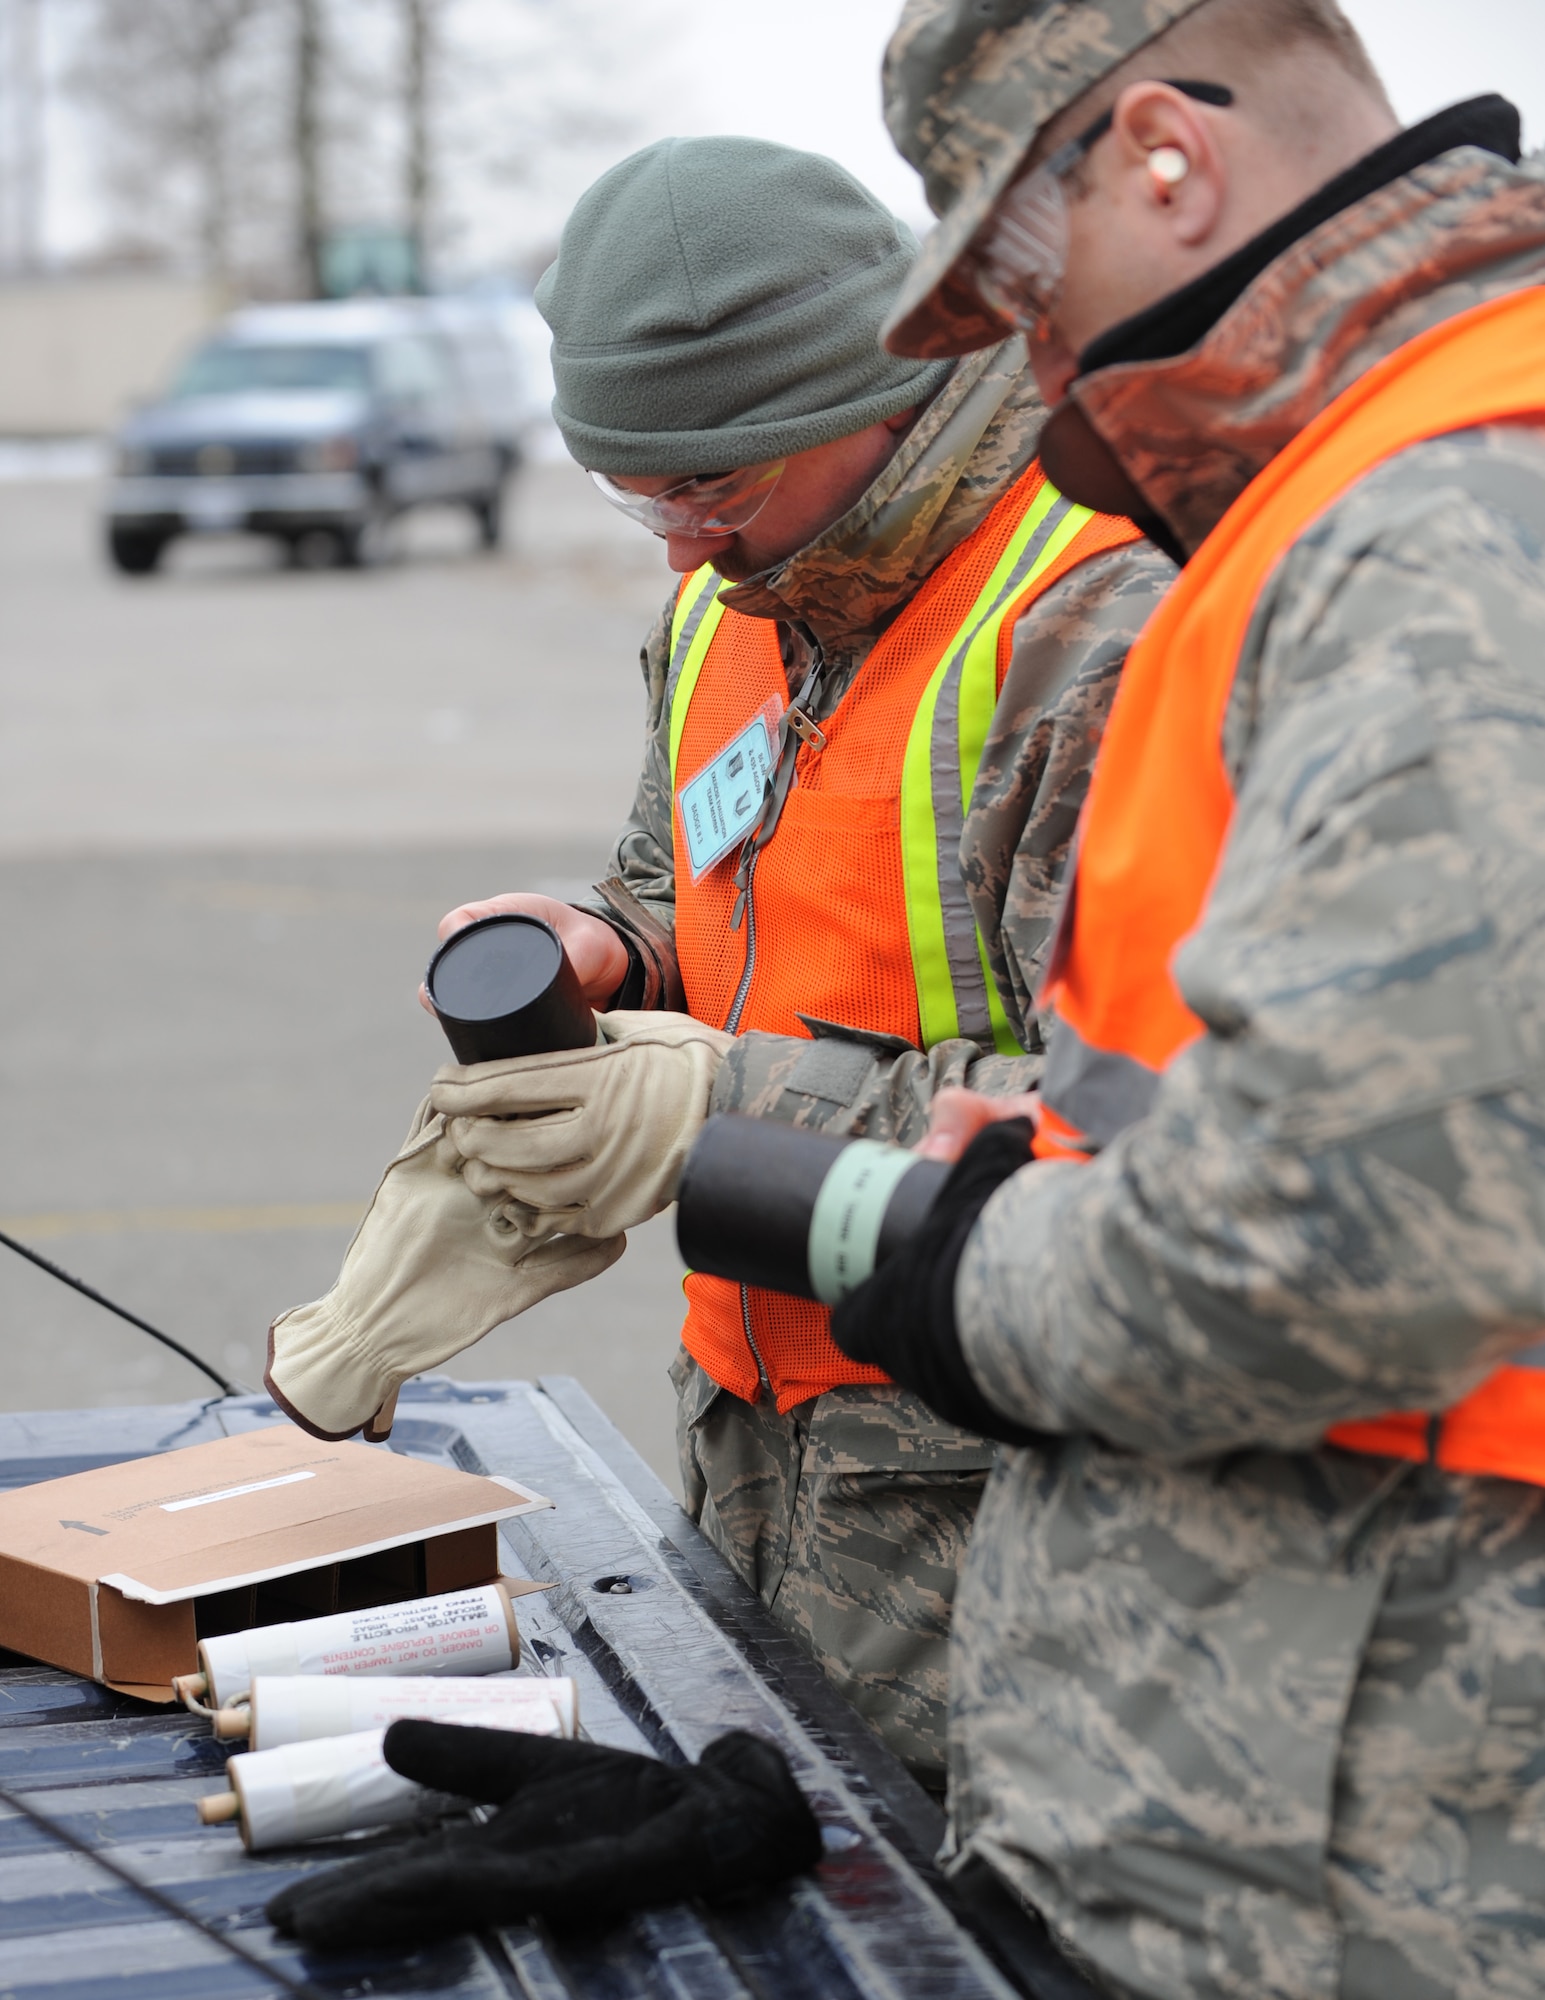 U.S. Air Force Tech. Sgt. David Baughman and Master Sgt. Darrin Powers, members of the 86th Airlift Wing commanders vice inspection exercise development section, inspections and readiness, prepare charges for detonation simulations during an exercise,  Ramstein Air Base, Germany, Dec. 15, 2009. The wing is conducting an exercise to evaluate its mission readiness and the ability to survive and operate in a chemical environment. (U.S. Air Force photo by Airman 1st Class Caleb Pierce)